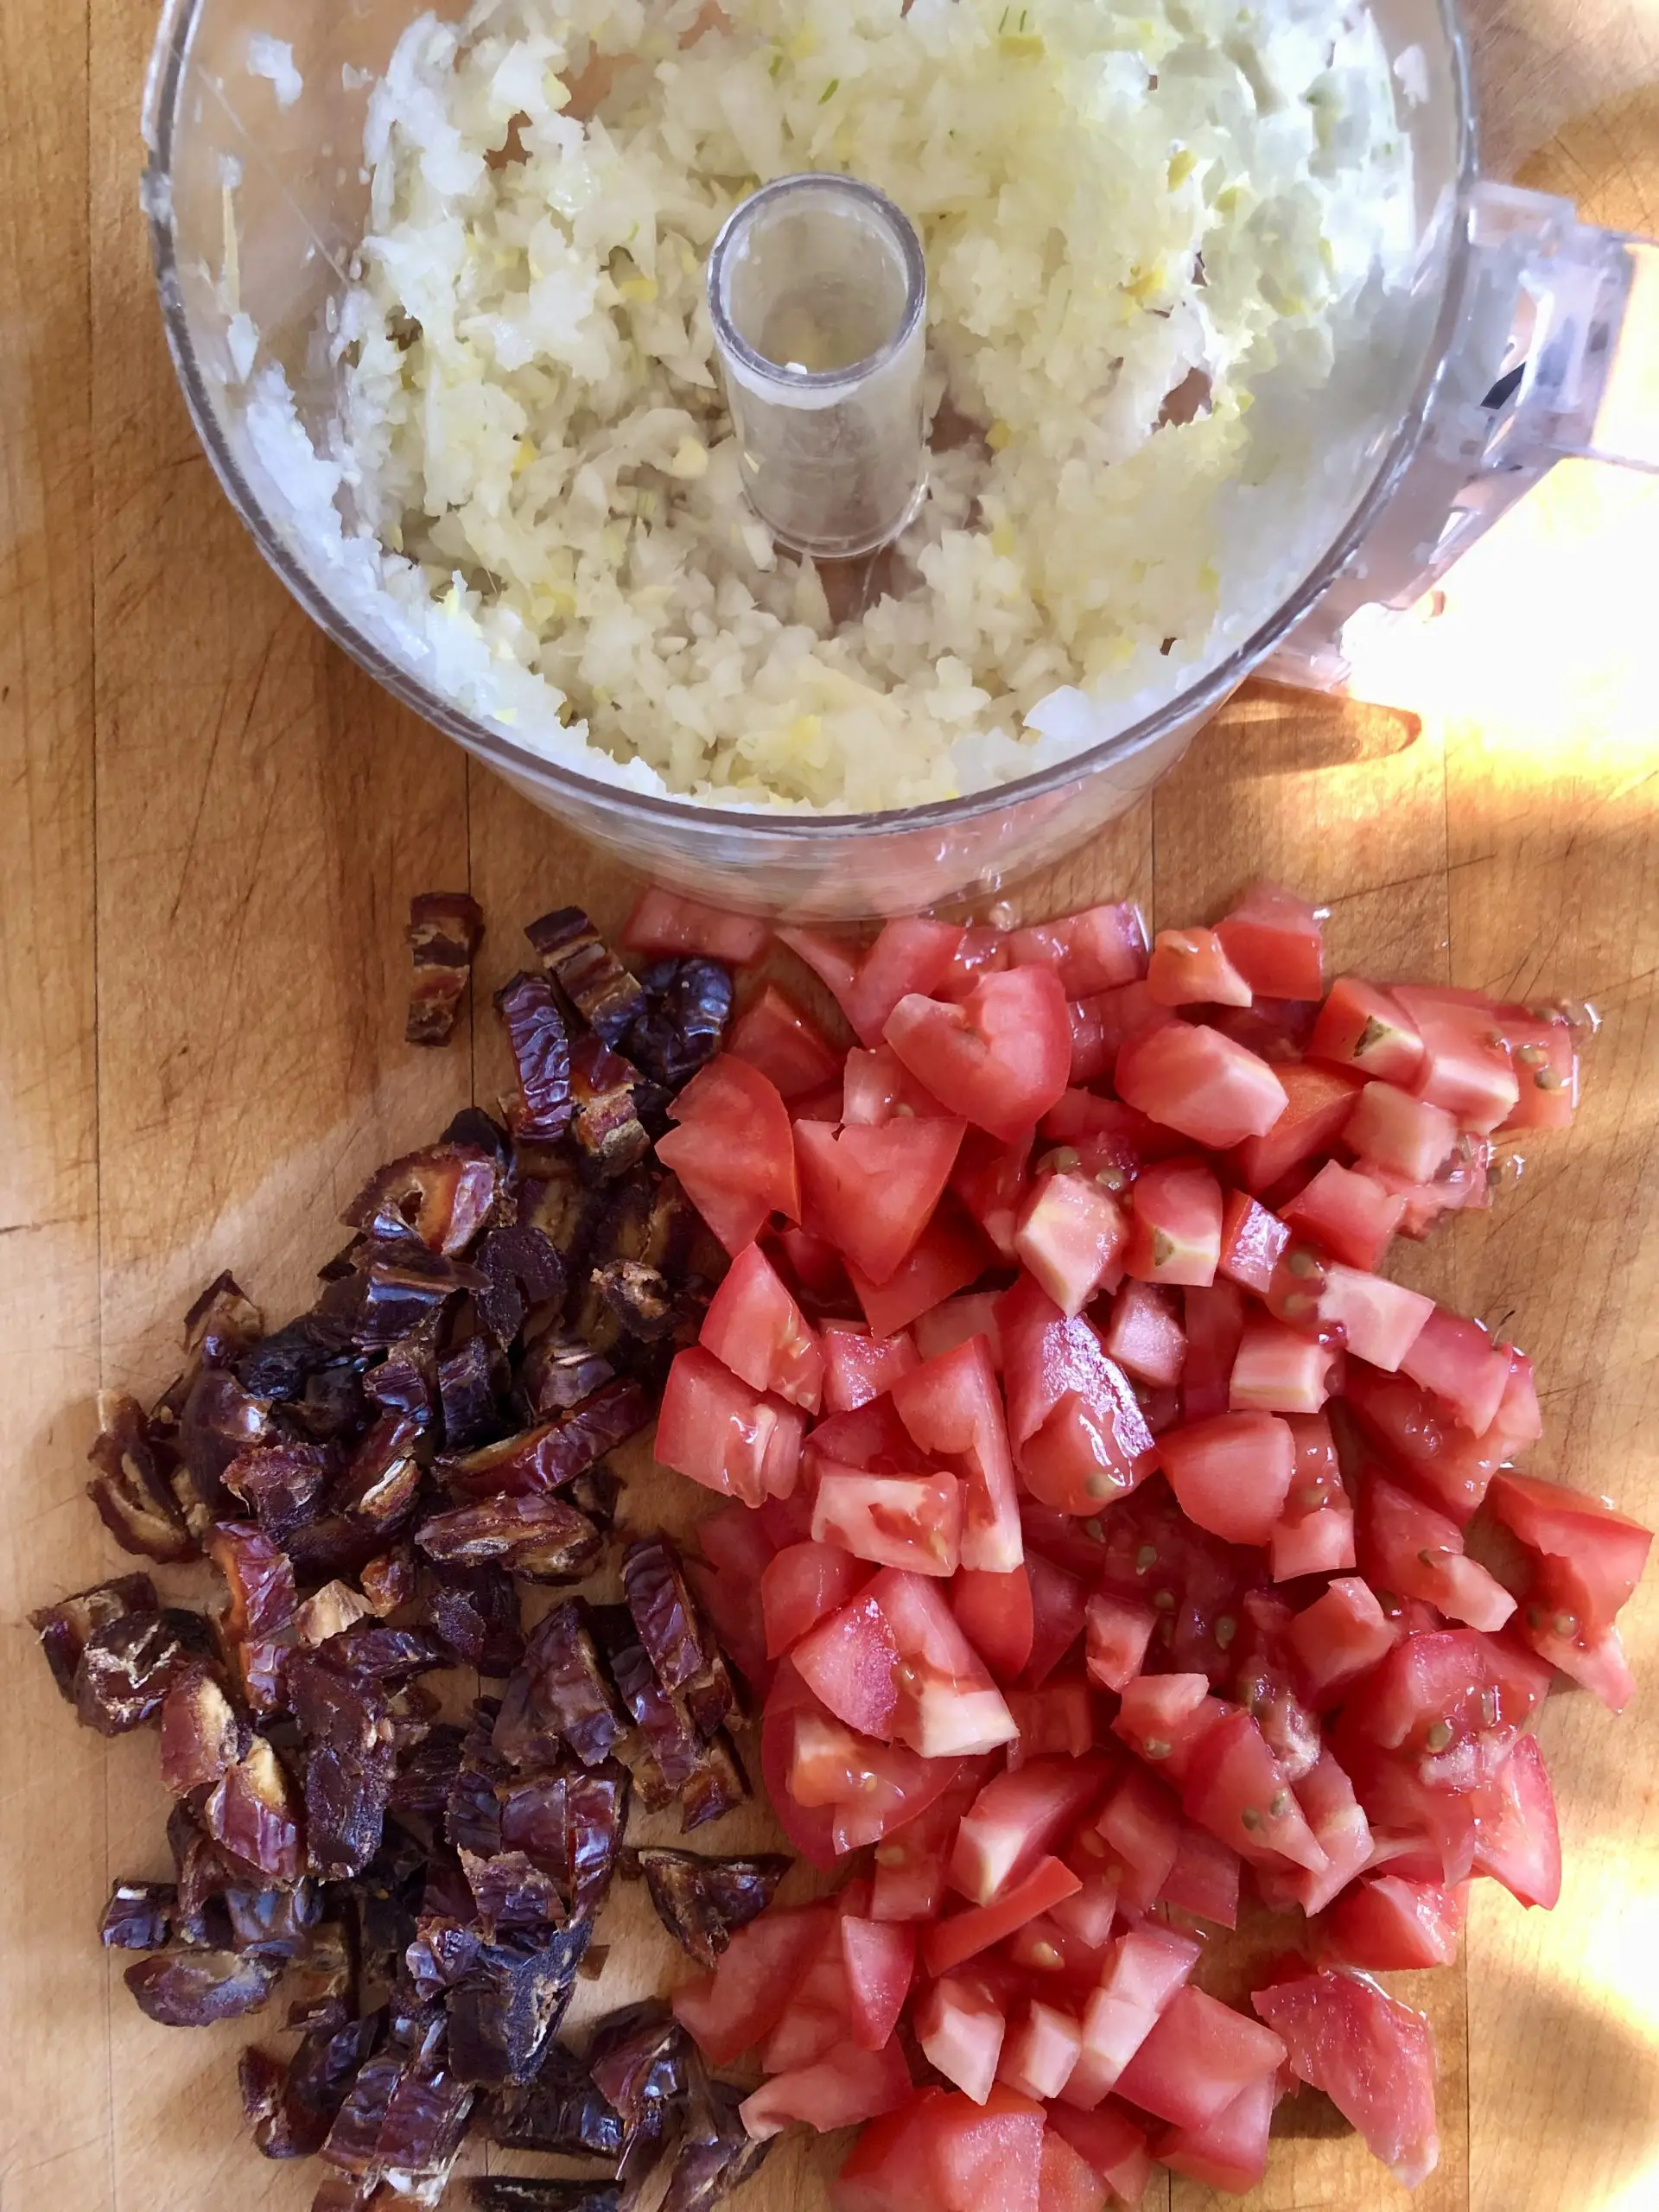 Minced onion, ginger and garlic in a food processor, diced tomatoes and dates